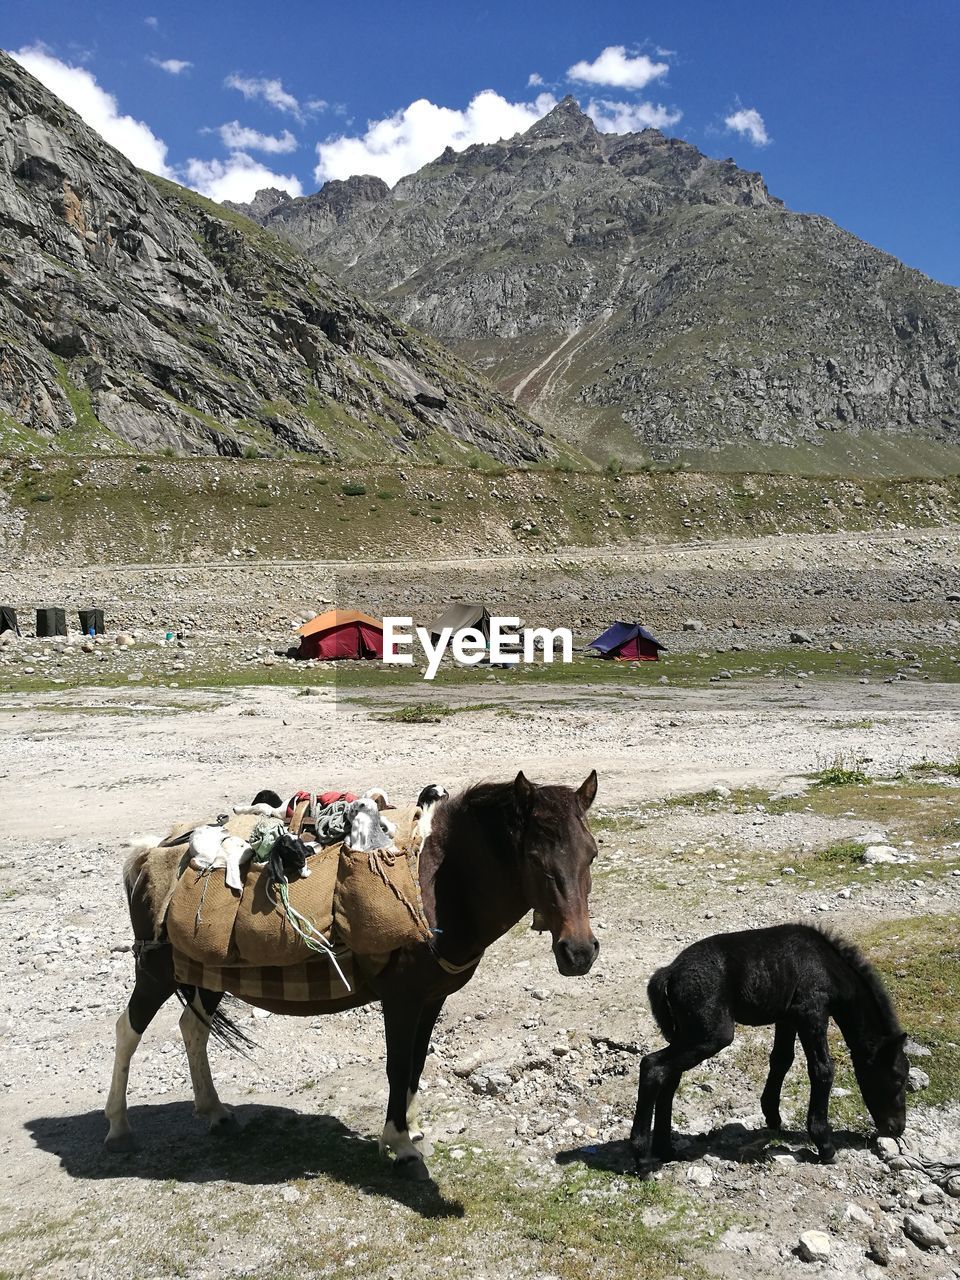 VIEW OF HORSES ON MOUNTAIN